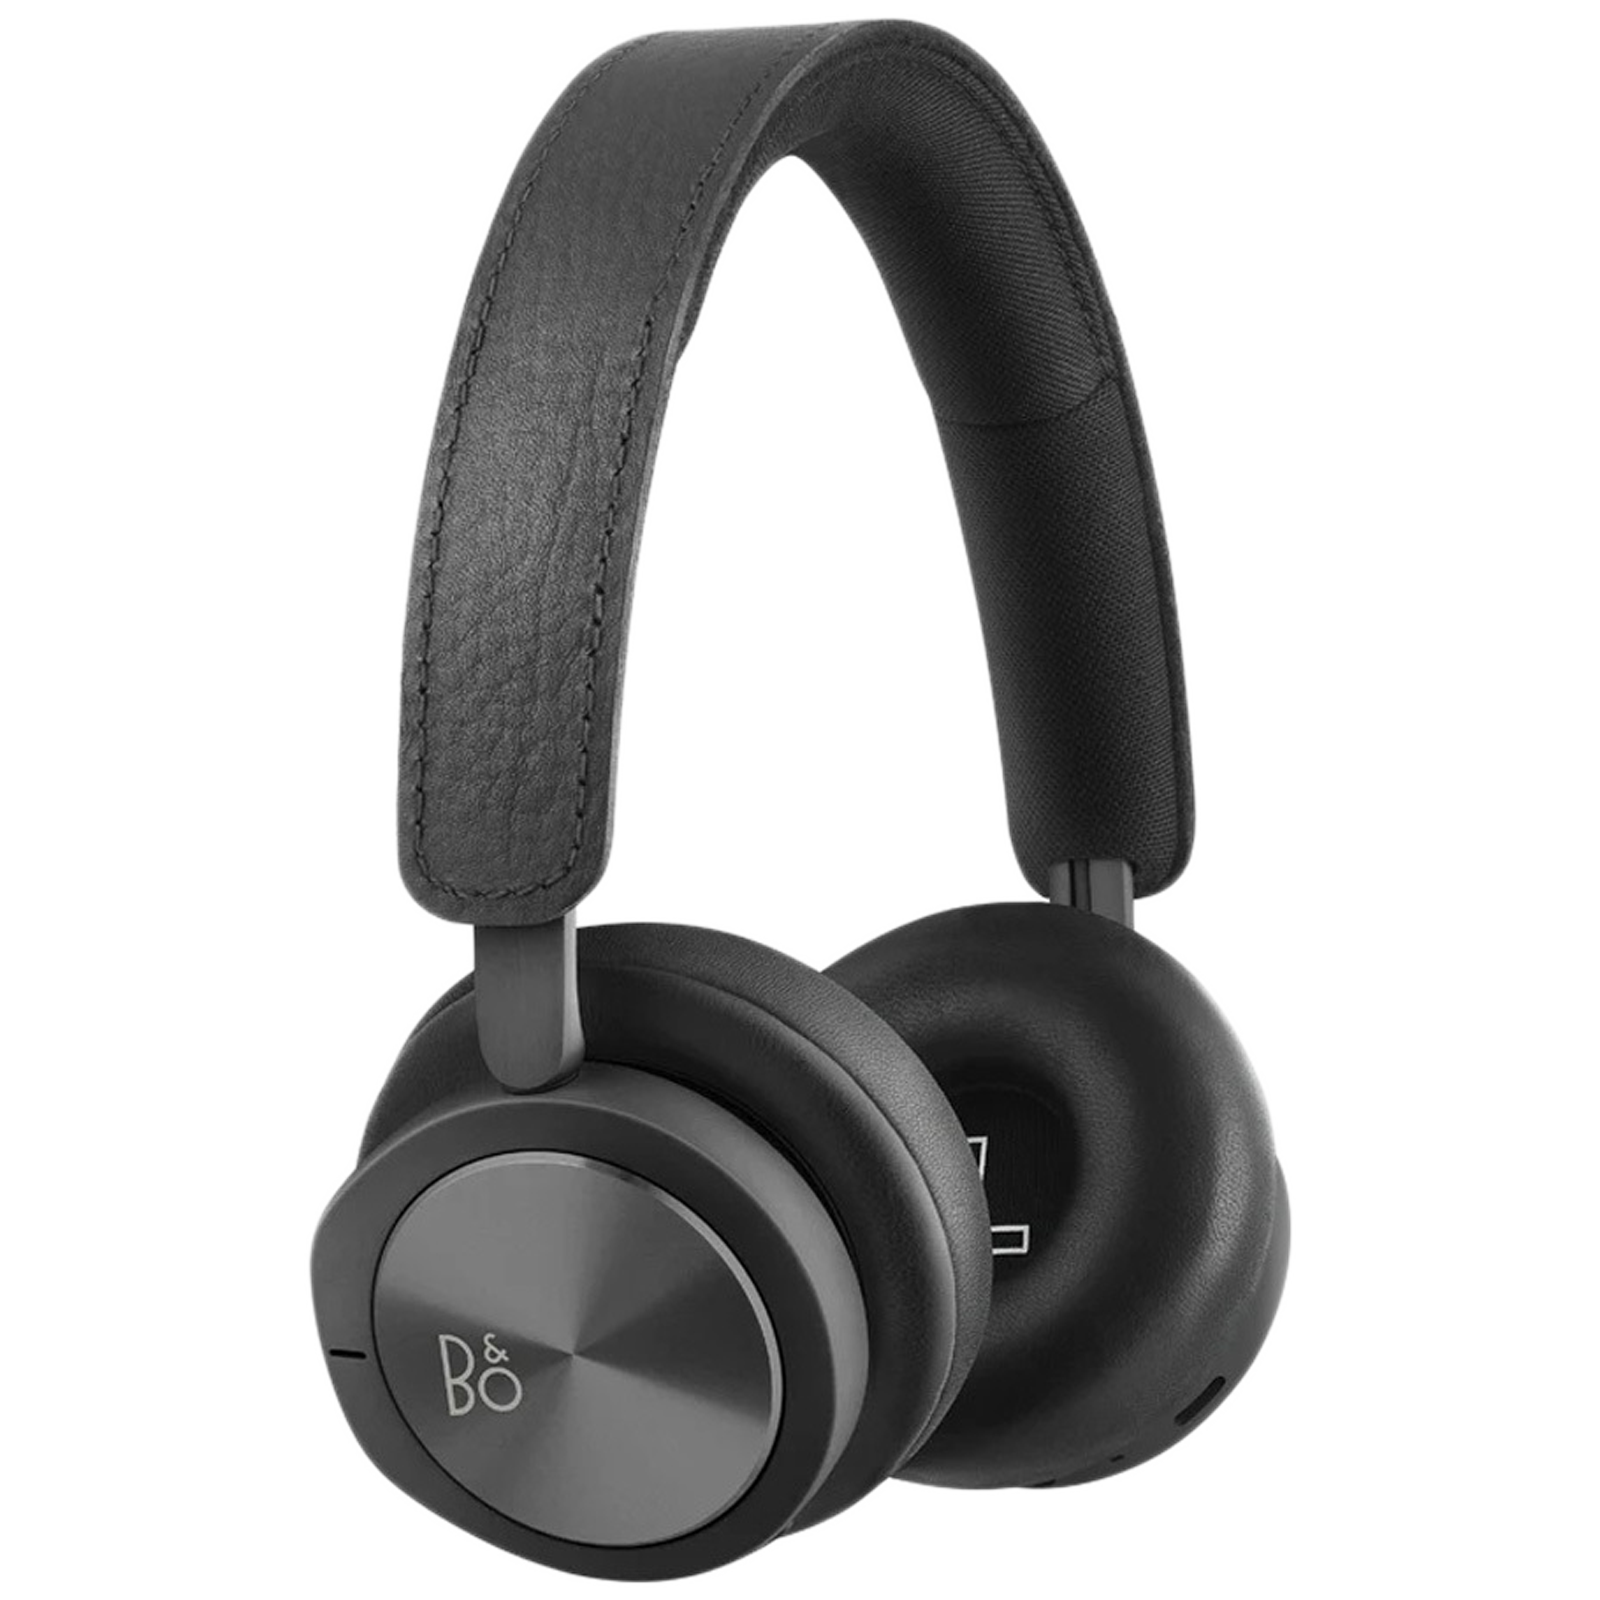 Bang & Olufsen Beoplay H8i BO-BPH8i-BLK On-Ear Active Noise Cancellation Wireless Headphone with Mic (Bluetooth 4.2, Built-in Proximity Sensor, Black)_1